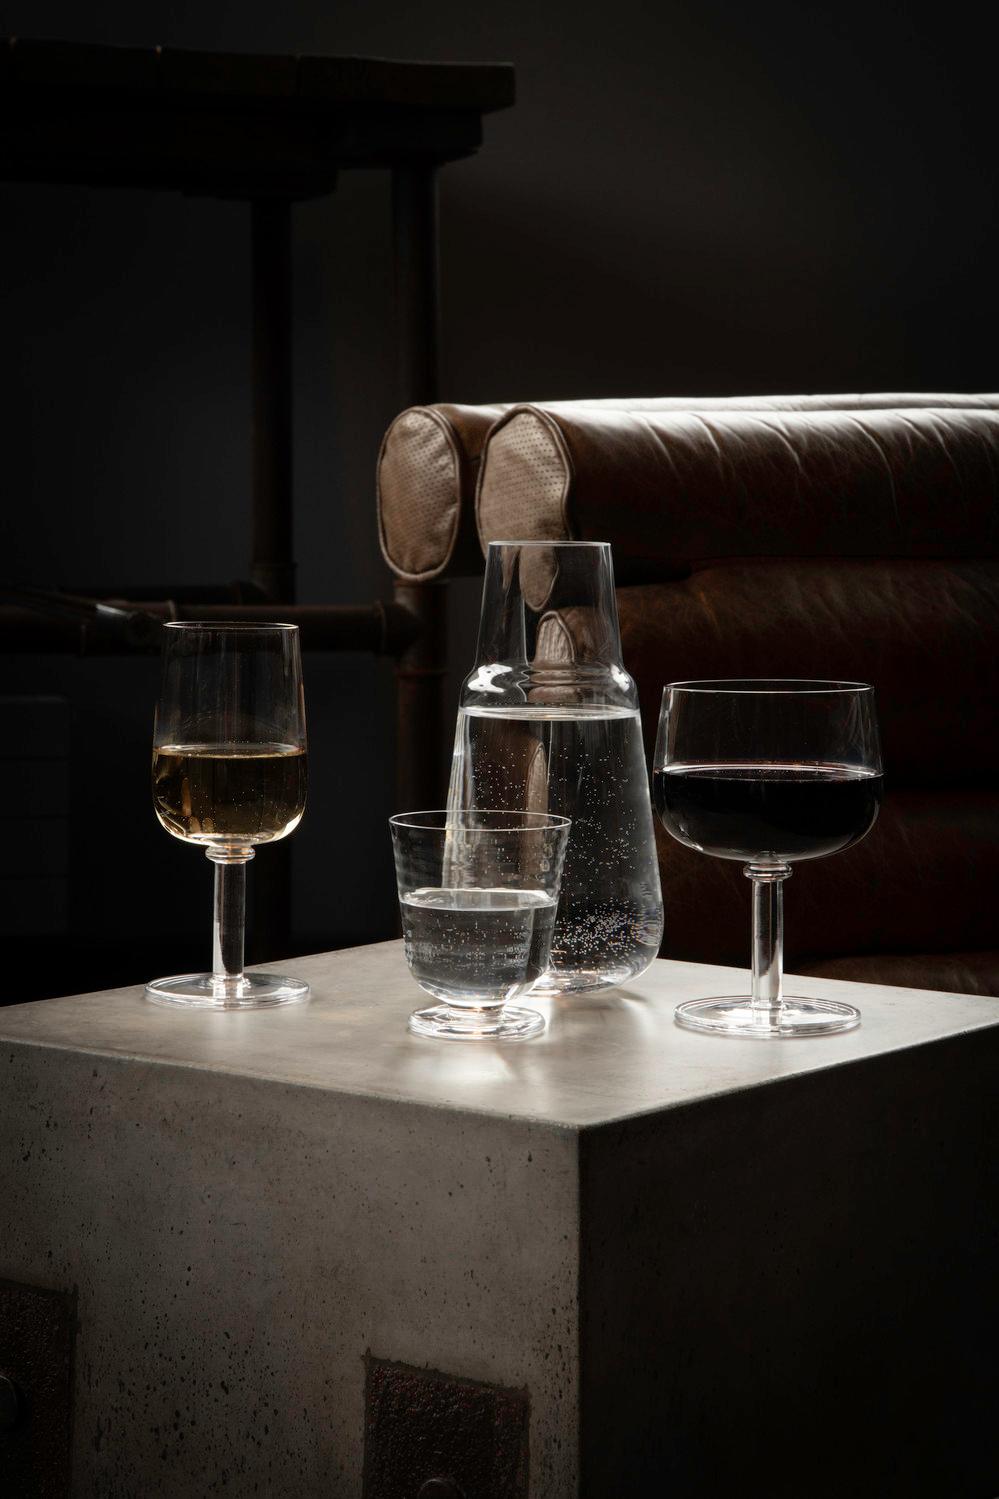 Viva from Kosta Boda is a versatile collection of informal stemware glasses for everyday use. You can serve white wine in the tall, narrow glass, but it also works for a red Bordeaux, a dessert wine, or cava. The glass brings out the best in any